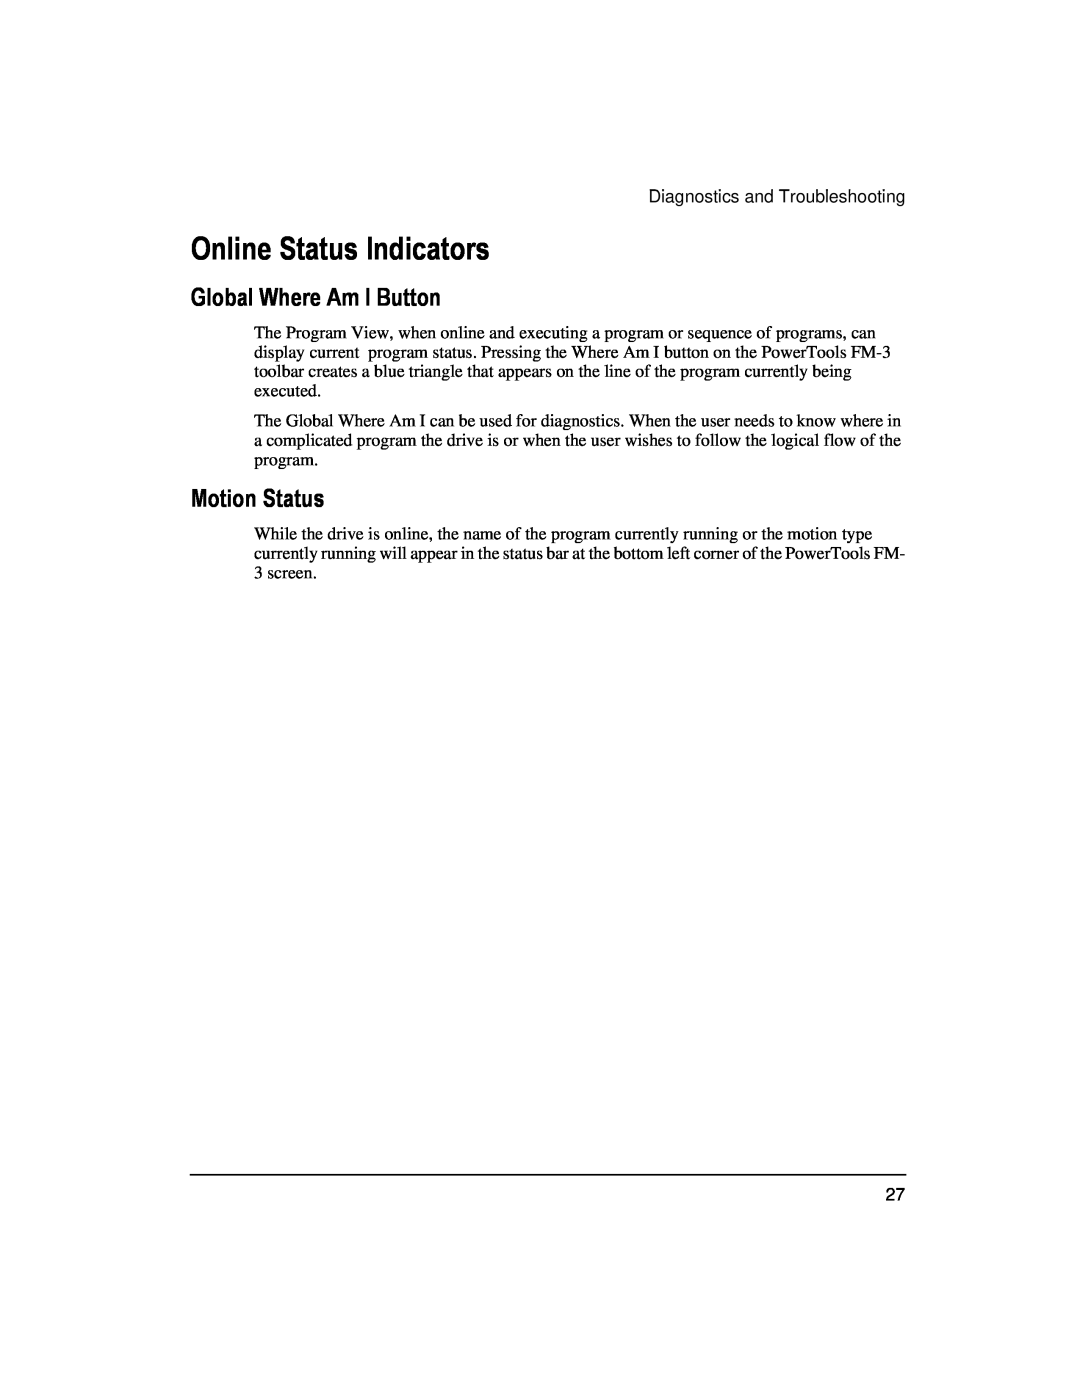 Emerson 400508-02 installation manual Online Status Indicators, Global Where Am I Button, Motion Status 